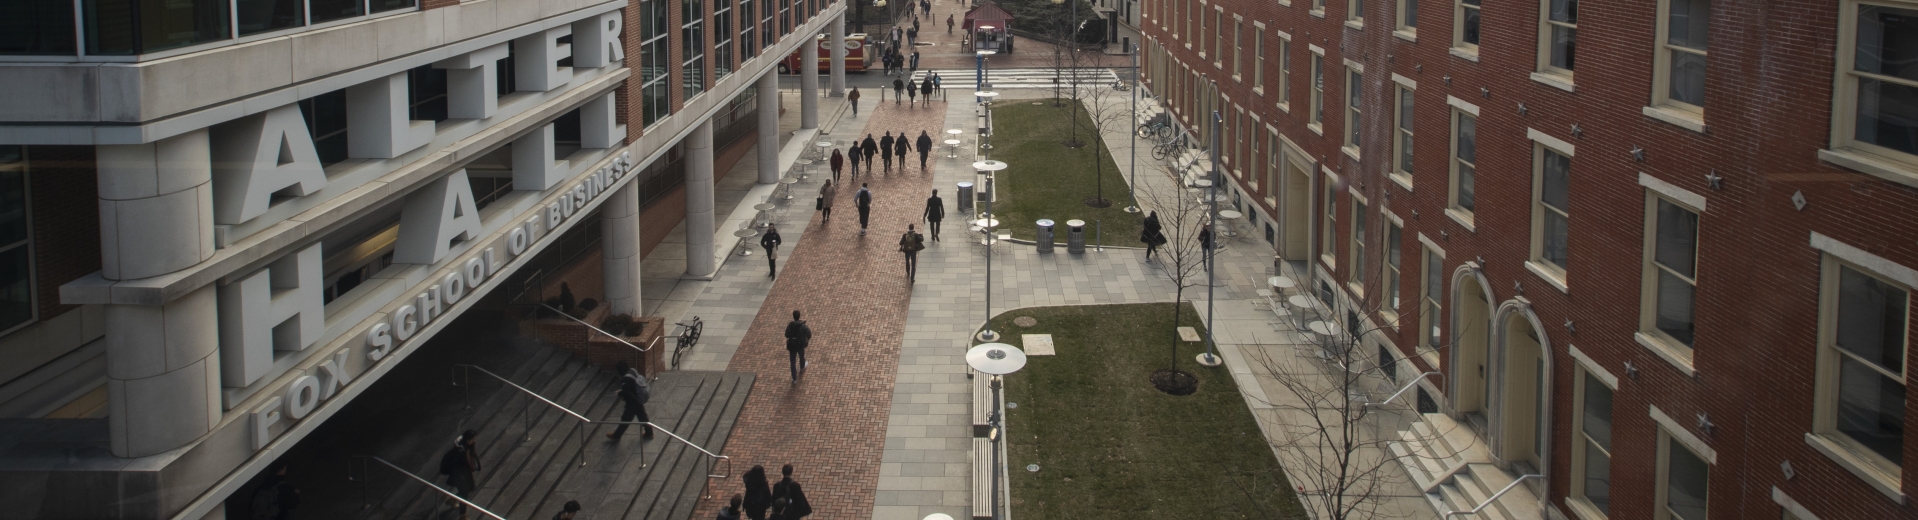 View of Alter Hall and Polett Walk at Temple University Main Campus.